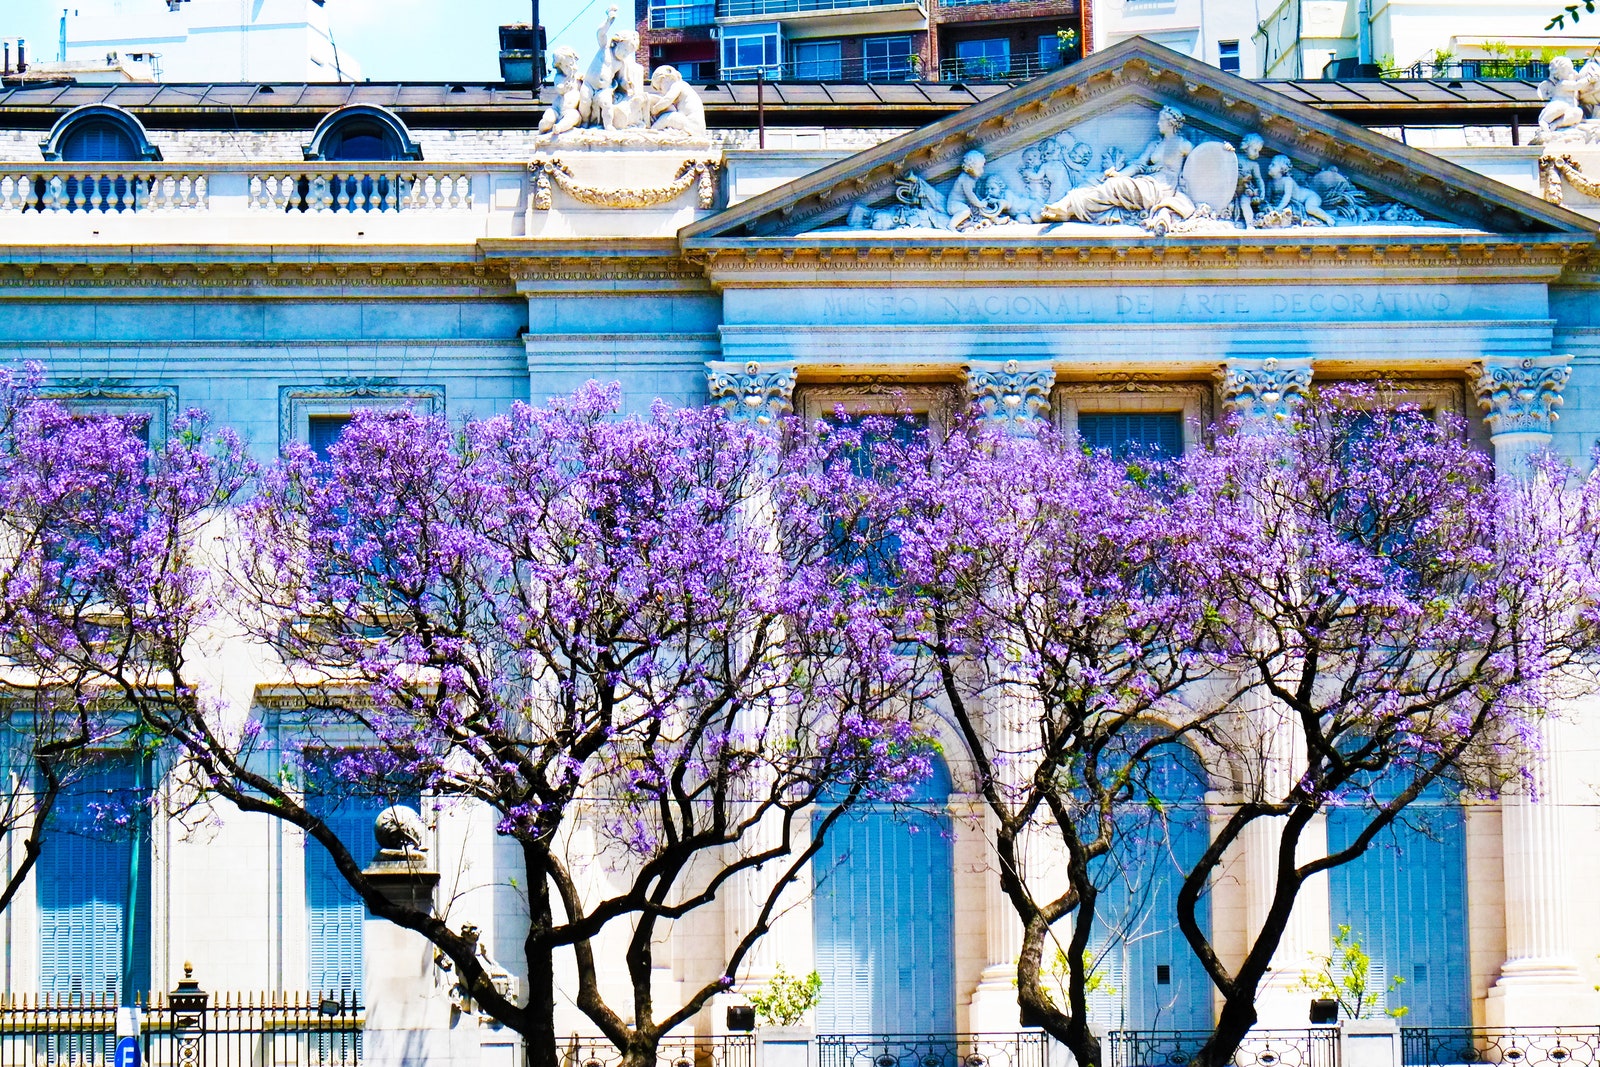 Buenos Aires Argentina Main Image Beauty Image CityScape